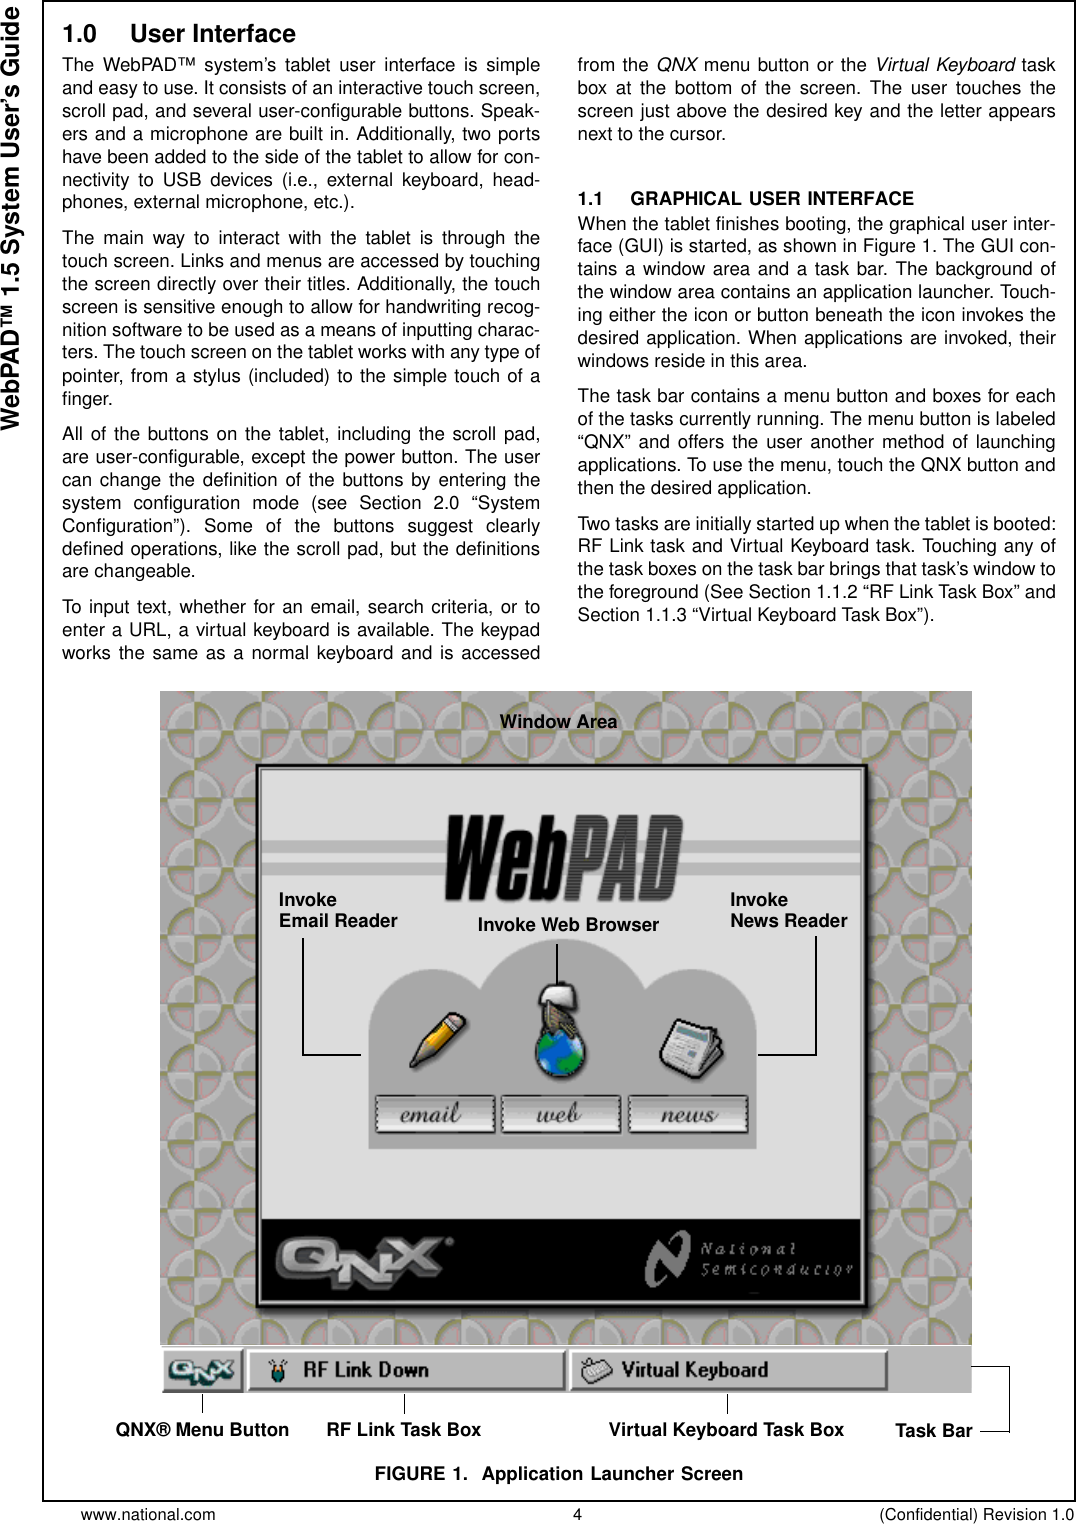 www.national.com 4 (Confidential) Revision 1.0WebPAD™ 1.5 System User’s Guide1.0 User InterfaceThe WebPAD™ system’s tablet user interface is simpleand easy to use. It consists of an interactive touch screen,scroll pad, and several user-configurable buttons. Speak-ers and a microphone are built in. Additionally, two portshave been added to the side of the tablet to allow for con-nectivity to USB devices (i.e., external keyboard, head-phones, external microphone, etc.).The main way to interact with the tablet is through thetouch screen. Links and menus are accessed by touchingthe screen directly over their titles. Additionally, the touchscreen is sensitive enough to allow for handwriting recog-nition software to be used as a means of inputting charac-ters. The touch screen on the tablet works with any type ofpointer, from a stylus (included) to the simple touch of afinger.All of the buttons on the tablet, including the scroll pad,are user-configurable, except the power button. The usercan change the definition of the buttons by entering thesystem configuration mode (see Section 2.0 “SystemConfiguration”). Some of the buttons suggest clearlydefined operations, like the scroll pad, but the definitionsare changeable.To input text, whether for an email, search criteria, or toenter a URL, a virtual keyboard is available. The keypadworks the same as a normal keyboard and is accessedfrom the QNX menu button or the Virtual Keyboard taskbox at the bottom of the screen. The user touches thescreen just above the desired key and the letter appearsnext to the cursor.1.1 GRAPHICAL USER INTERFACEWhen the tablet finishes booting, the graphical user inter-face (GUI) is started, as shown in Figure 1. The GUI con-tains a window area and a task bar. The background ofthe window area contains an application launcher. Touch-ing either the icon or button beneath the icon invokes thedesired application. When applications are invoked, theirwindows reside in this area.The task bar contains a menu button and boxes for eachof the tasks currently running. The menu button is labeled“QNX” and offers the user another method of launchingapplications. To use the menu, touch the QNX button andthen the desired application.Two tasks are initially started up when the tablet is booted:RF Link task and Virtual Keyboard task. Touching any ofthe task boxes on the task bar brings that task’s window tothe foreground (See Section 1.1.2 “RF Link Task Box” andSection 1.1.3 “Virtual Keyboard Task Box”).FIGURE 1. Application Launcher ScreenQNX® Menu ButtonInvokeEmail Reader InvokeNews ReaderInvoke Web BrowserRF Link Task Box Virtual Keyboard Task Box Task BarWindow Area